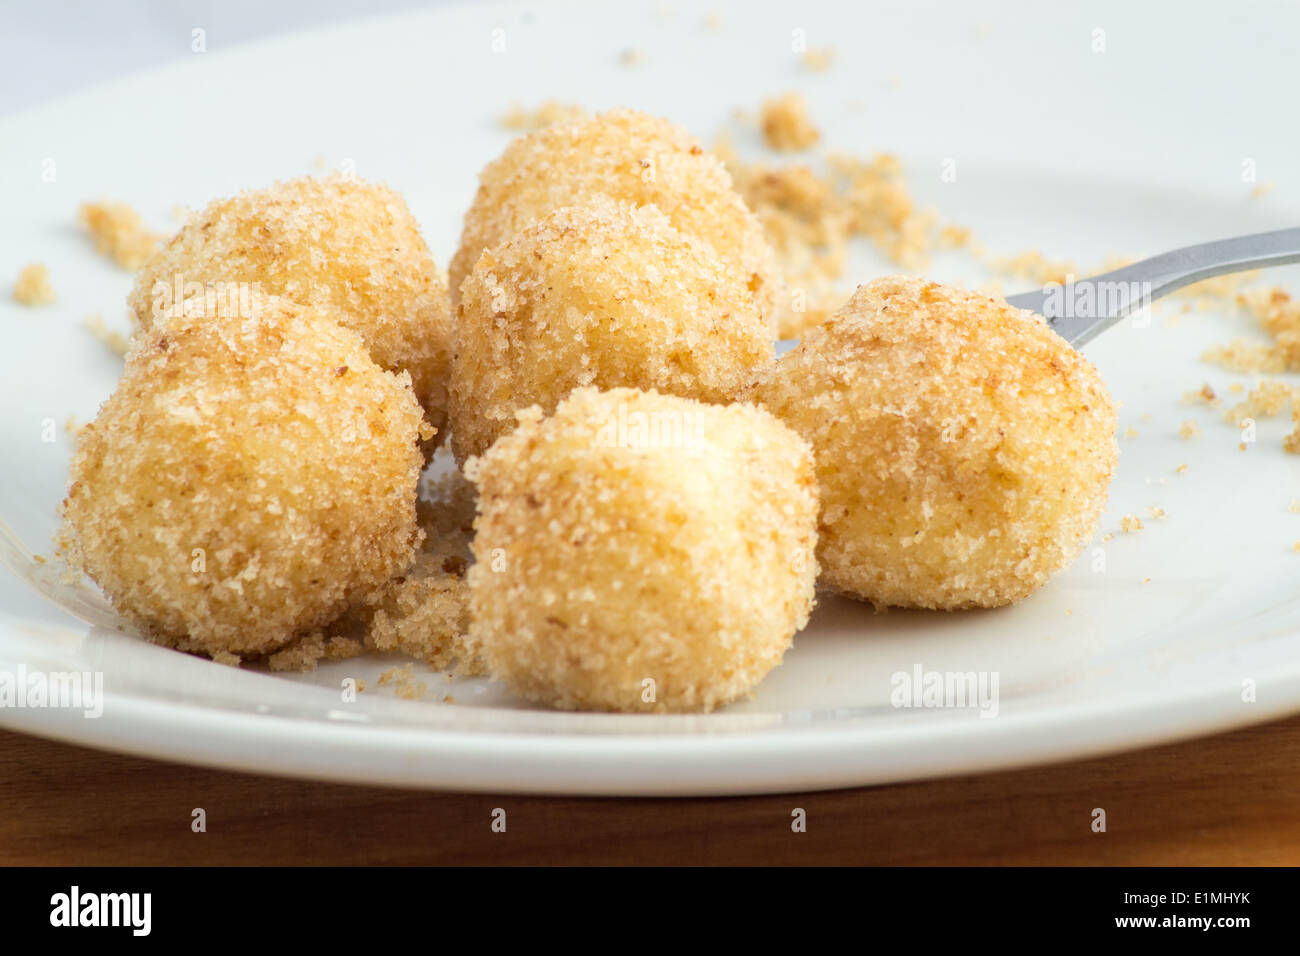 Delicious Home Made Cottage Cheese Dumplings With Breadcrumbs